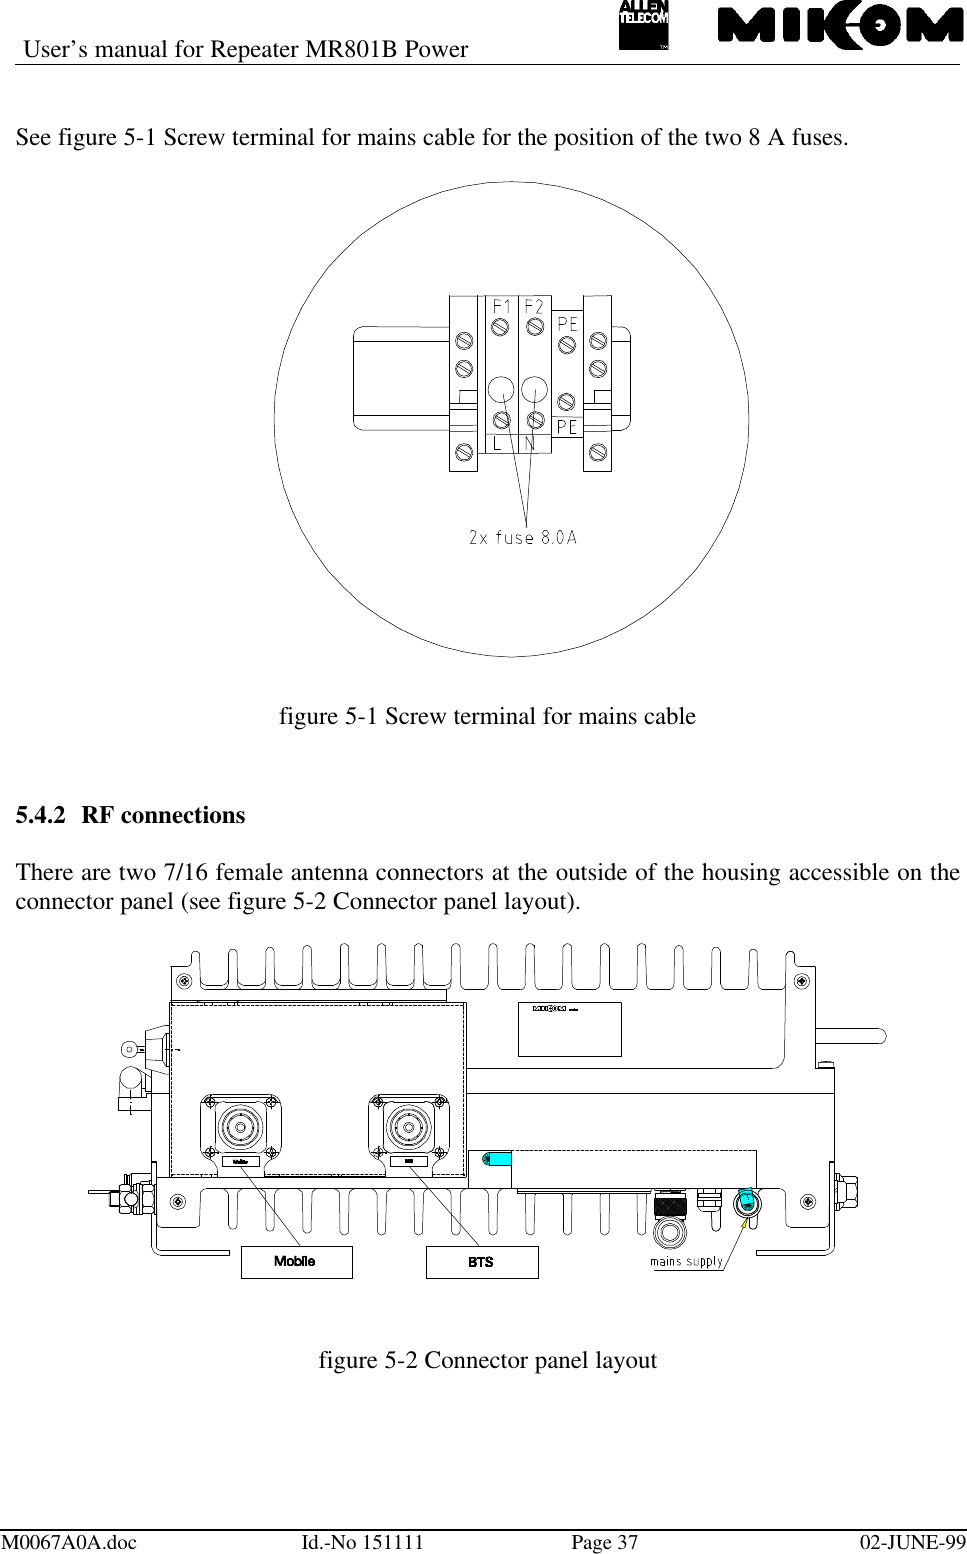 User’s manual for Repeater MR801B PowerM0067A0A.doc Id.-No 151111 Page 37 02-JUNE-99See figure 5-1 Screw terminal for mains cable for the position of the two 8 A fuses.figure 5-1 Screw terminal for mains cable5.4.2 RF connectionsThere are two 7/16 female antenna connectors at the outside of the housing accessible on theconnector panel (see figure 5-2 Connector panel layout).figure 5-2 Connector panel layout